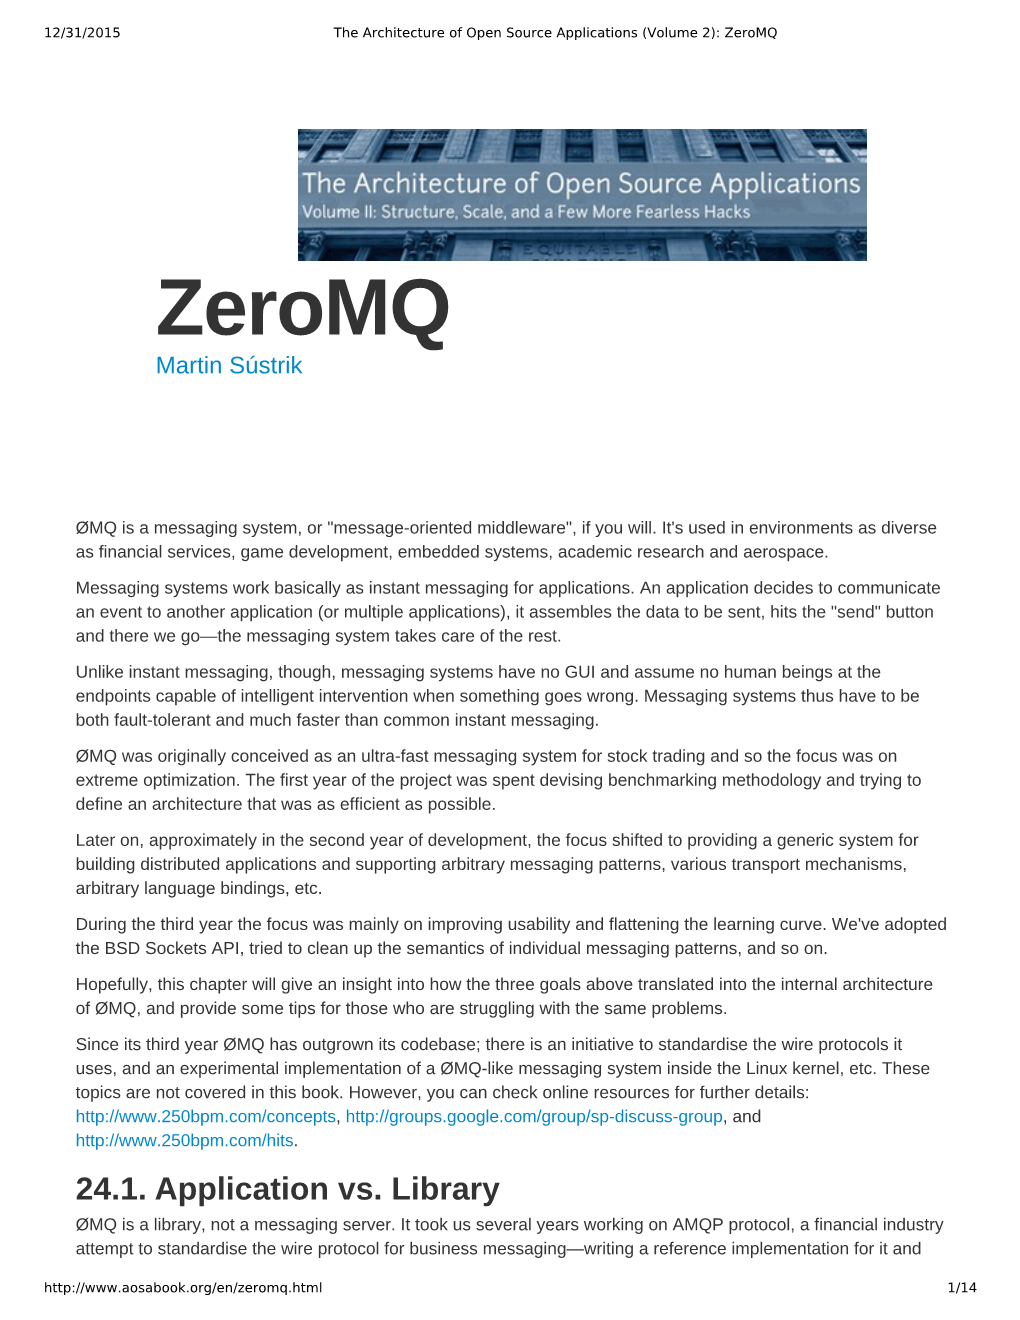 The Architecture of Open Source Applications (Volume 2) Zeromq.Pdf